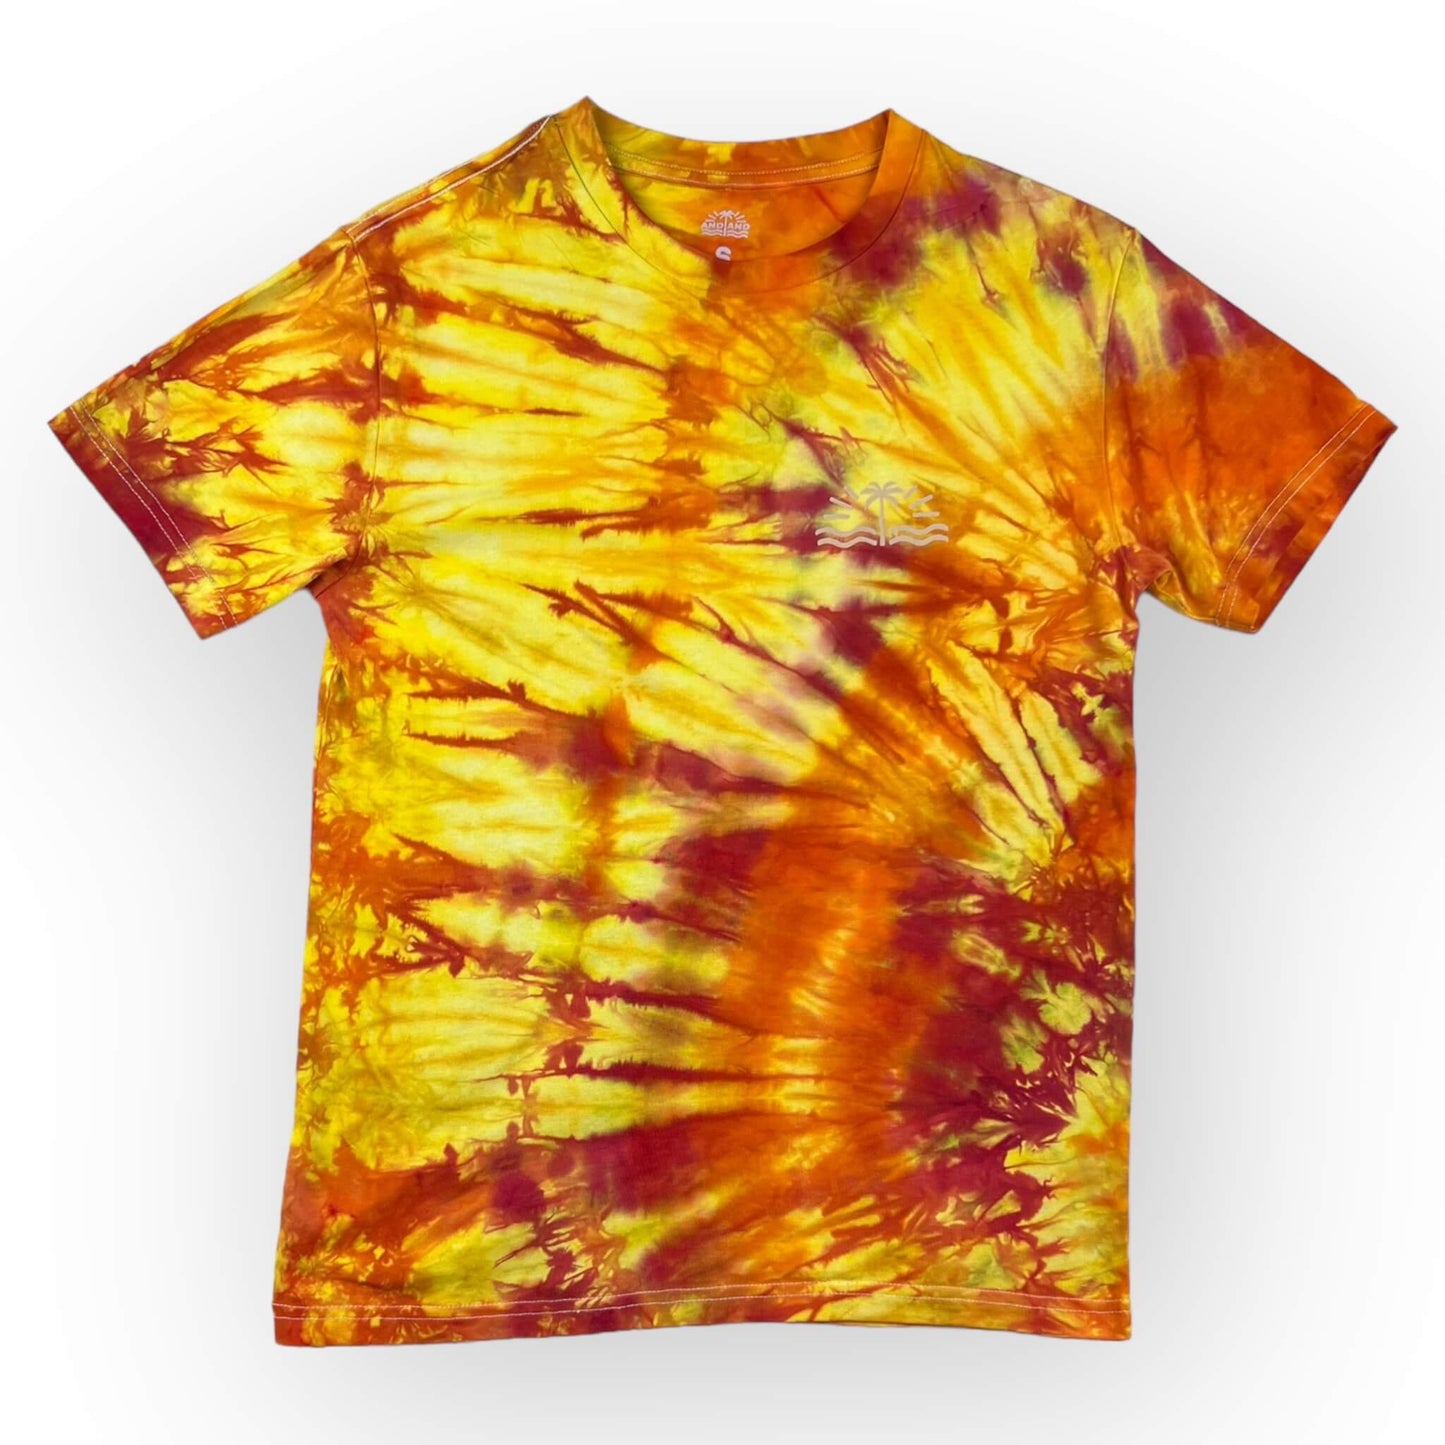 Oranges & Yellows Tie Dye Tee - Adult Small